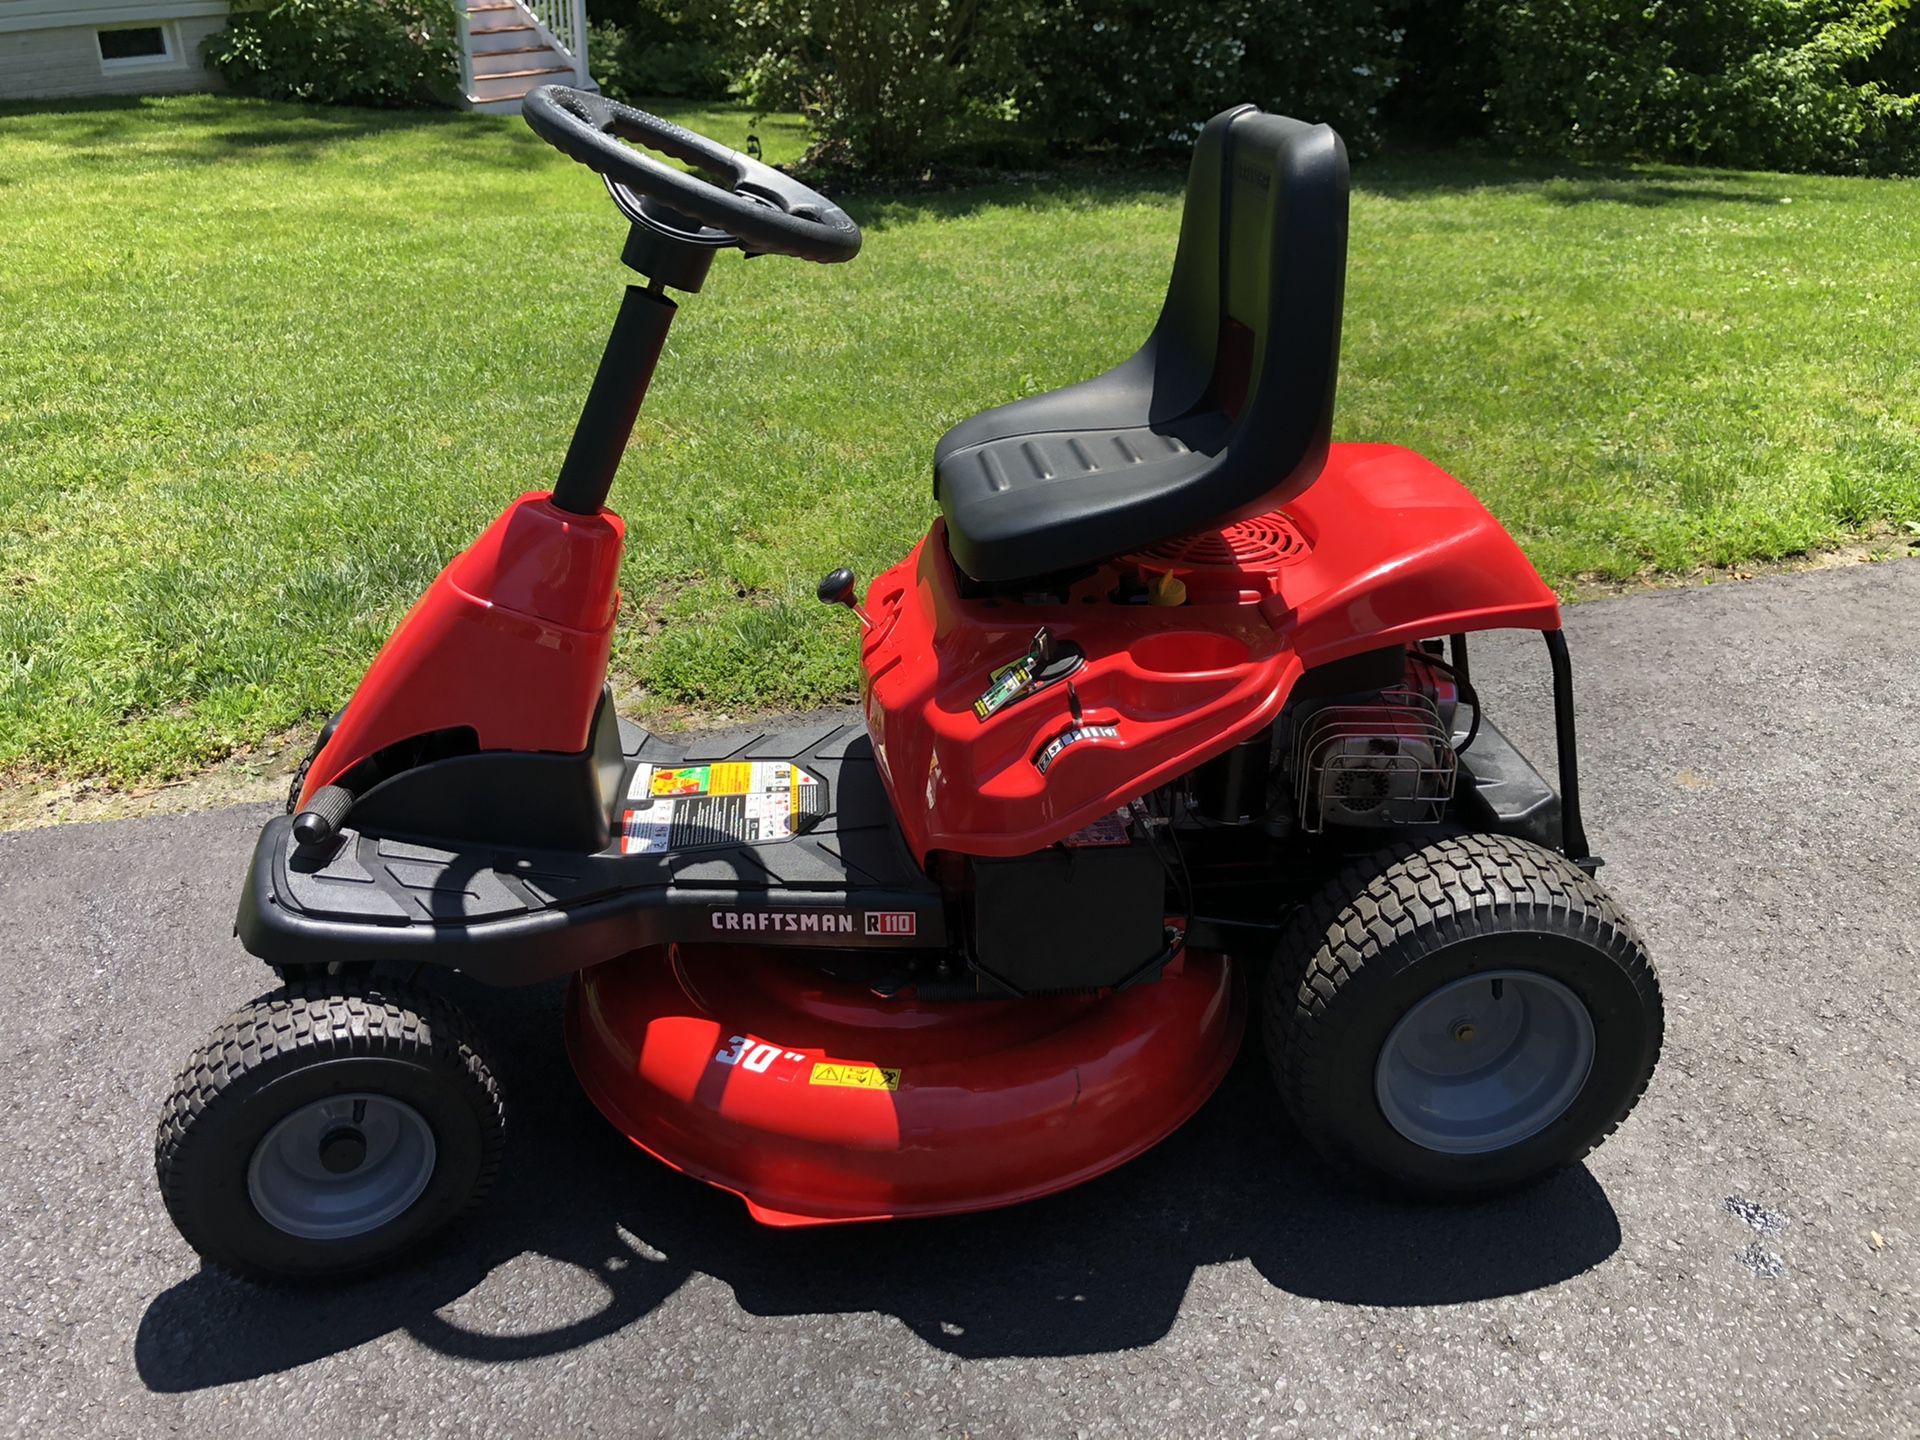 New Craftsman R110 30" Riding Mower with delivery